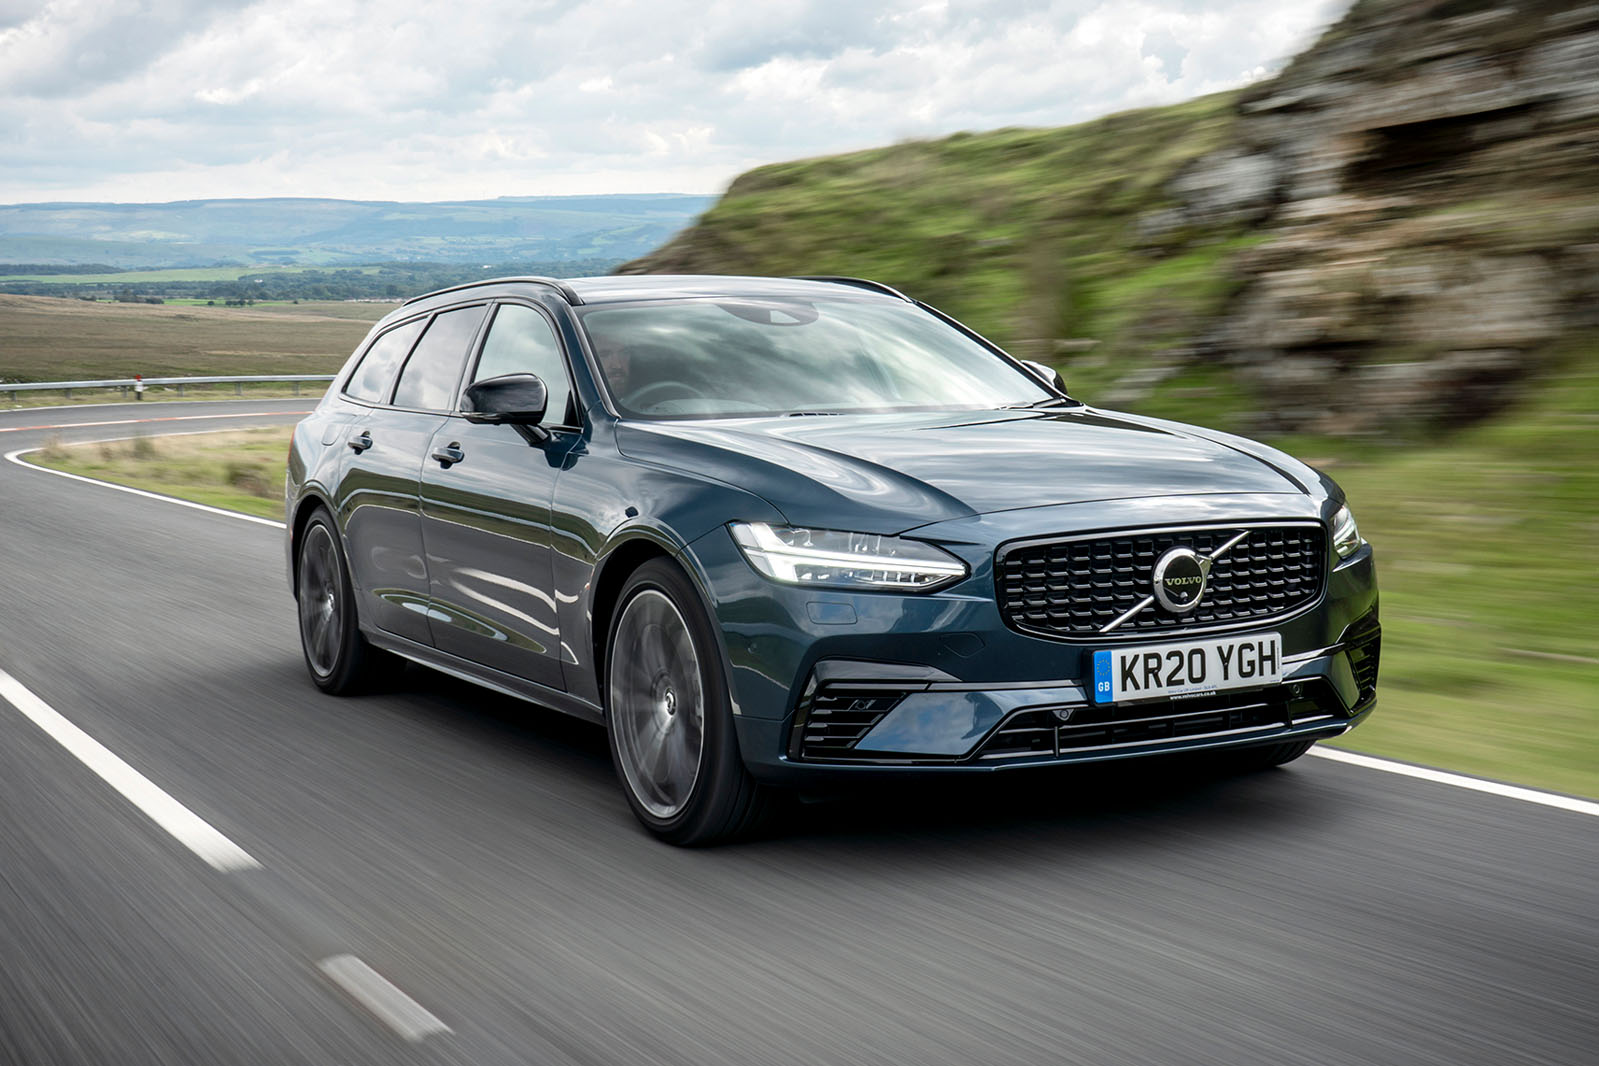 https://www.autocar.co.uk/sites/autocar.co.uk/files/images/car-reviews/first-drives/legacy/1-volvo-v90-recharge-t6-2020-uk-fd-hero-front.jpg